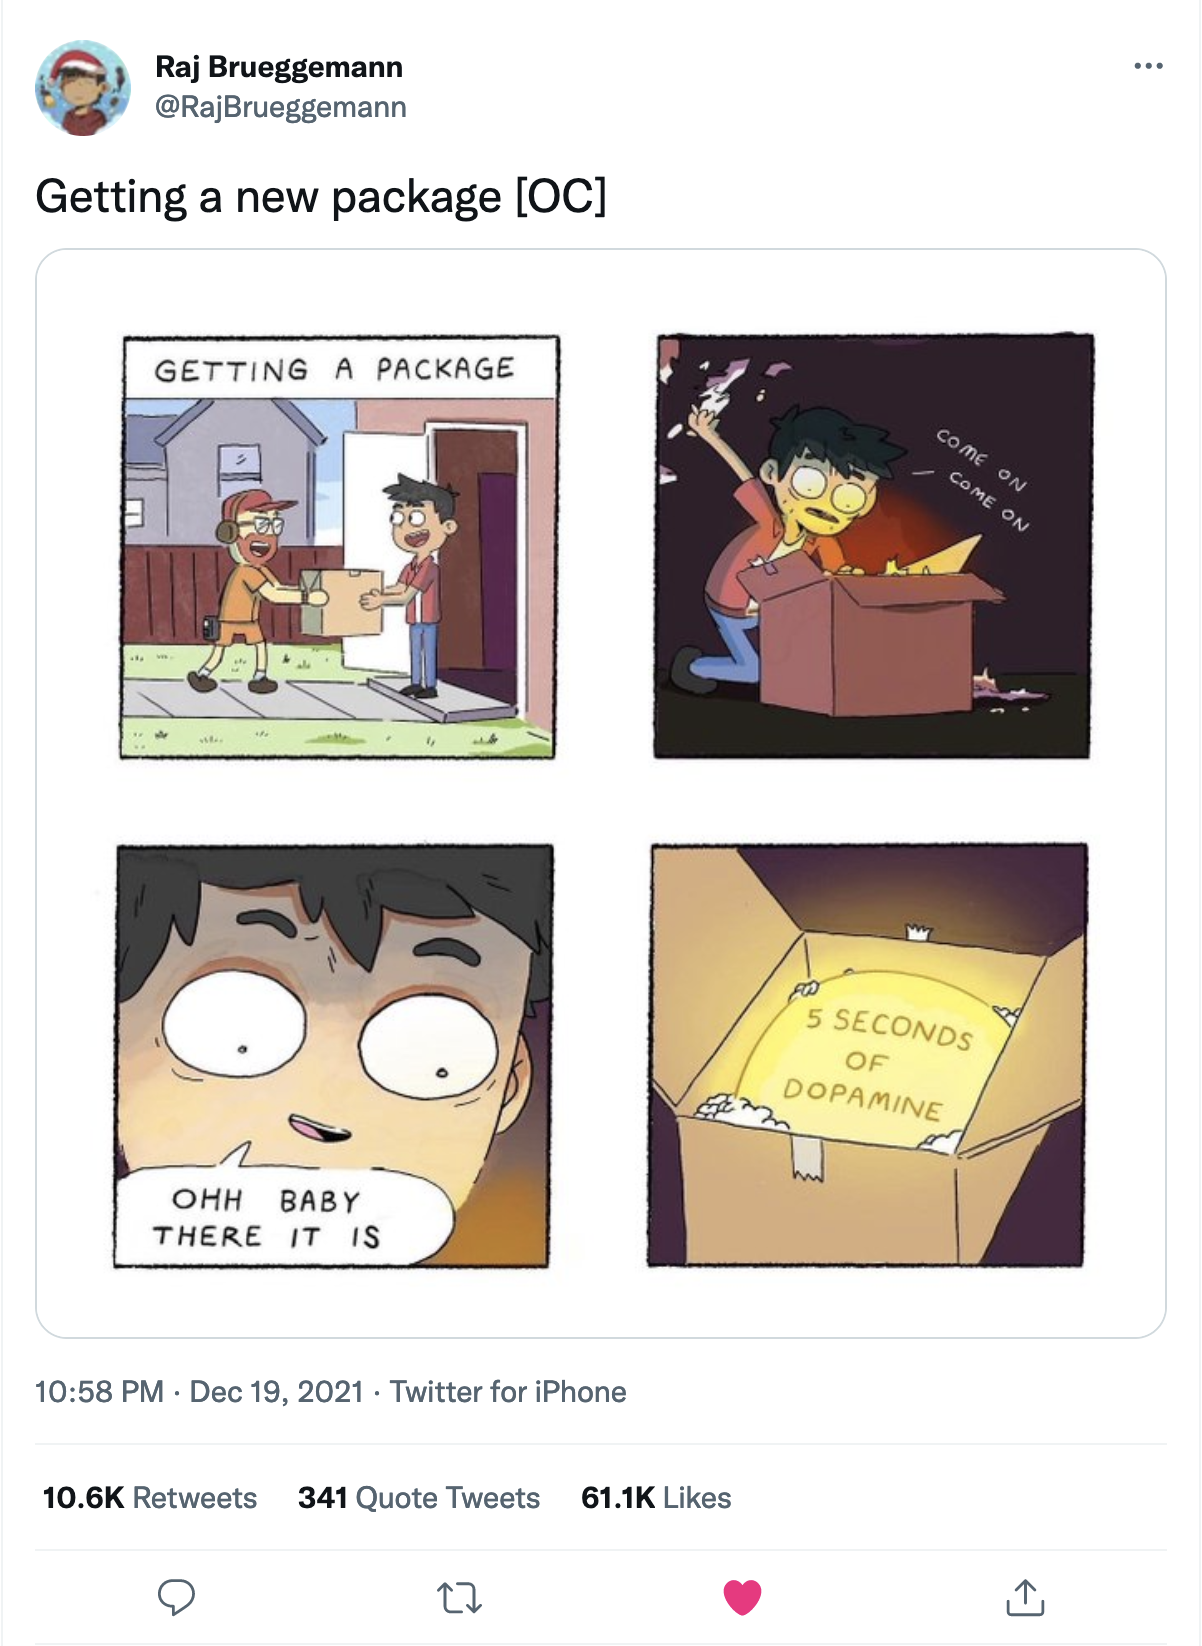 Panel 1: "Getting a package"; Panel 2: Man rushing to open the box, mumbling "COME ON COME ON", and the content inside is glowing; Panel 3: Zoom in to man's face, he says "OHH BABY THERE IT IS"; Panel 3: A glowing orb in the cardboard box with "5 SECONDS OF DOPAMINE" written on it